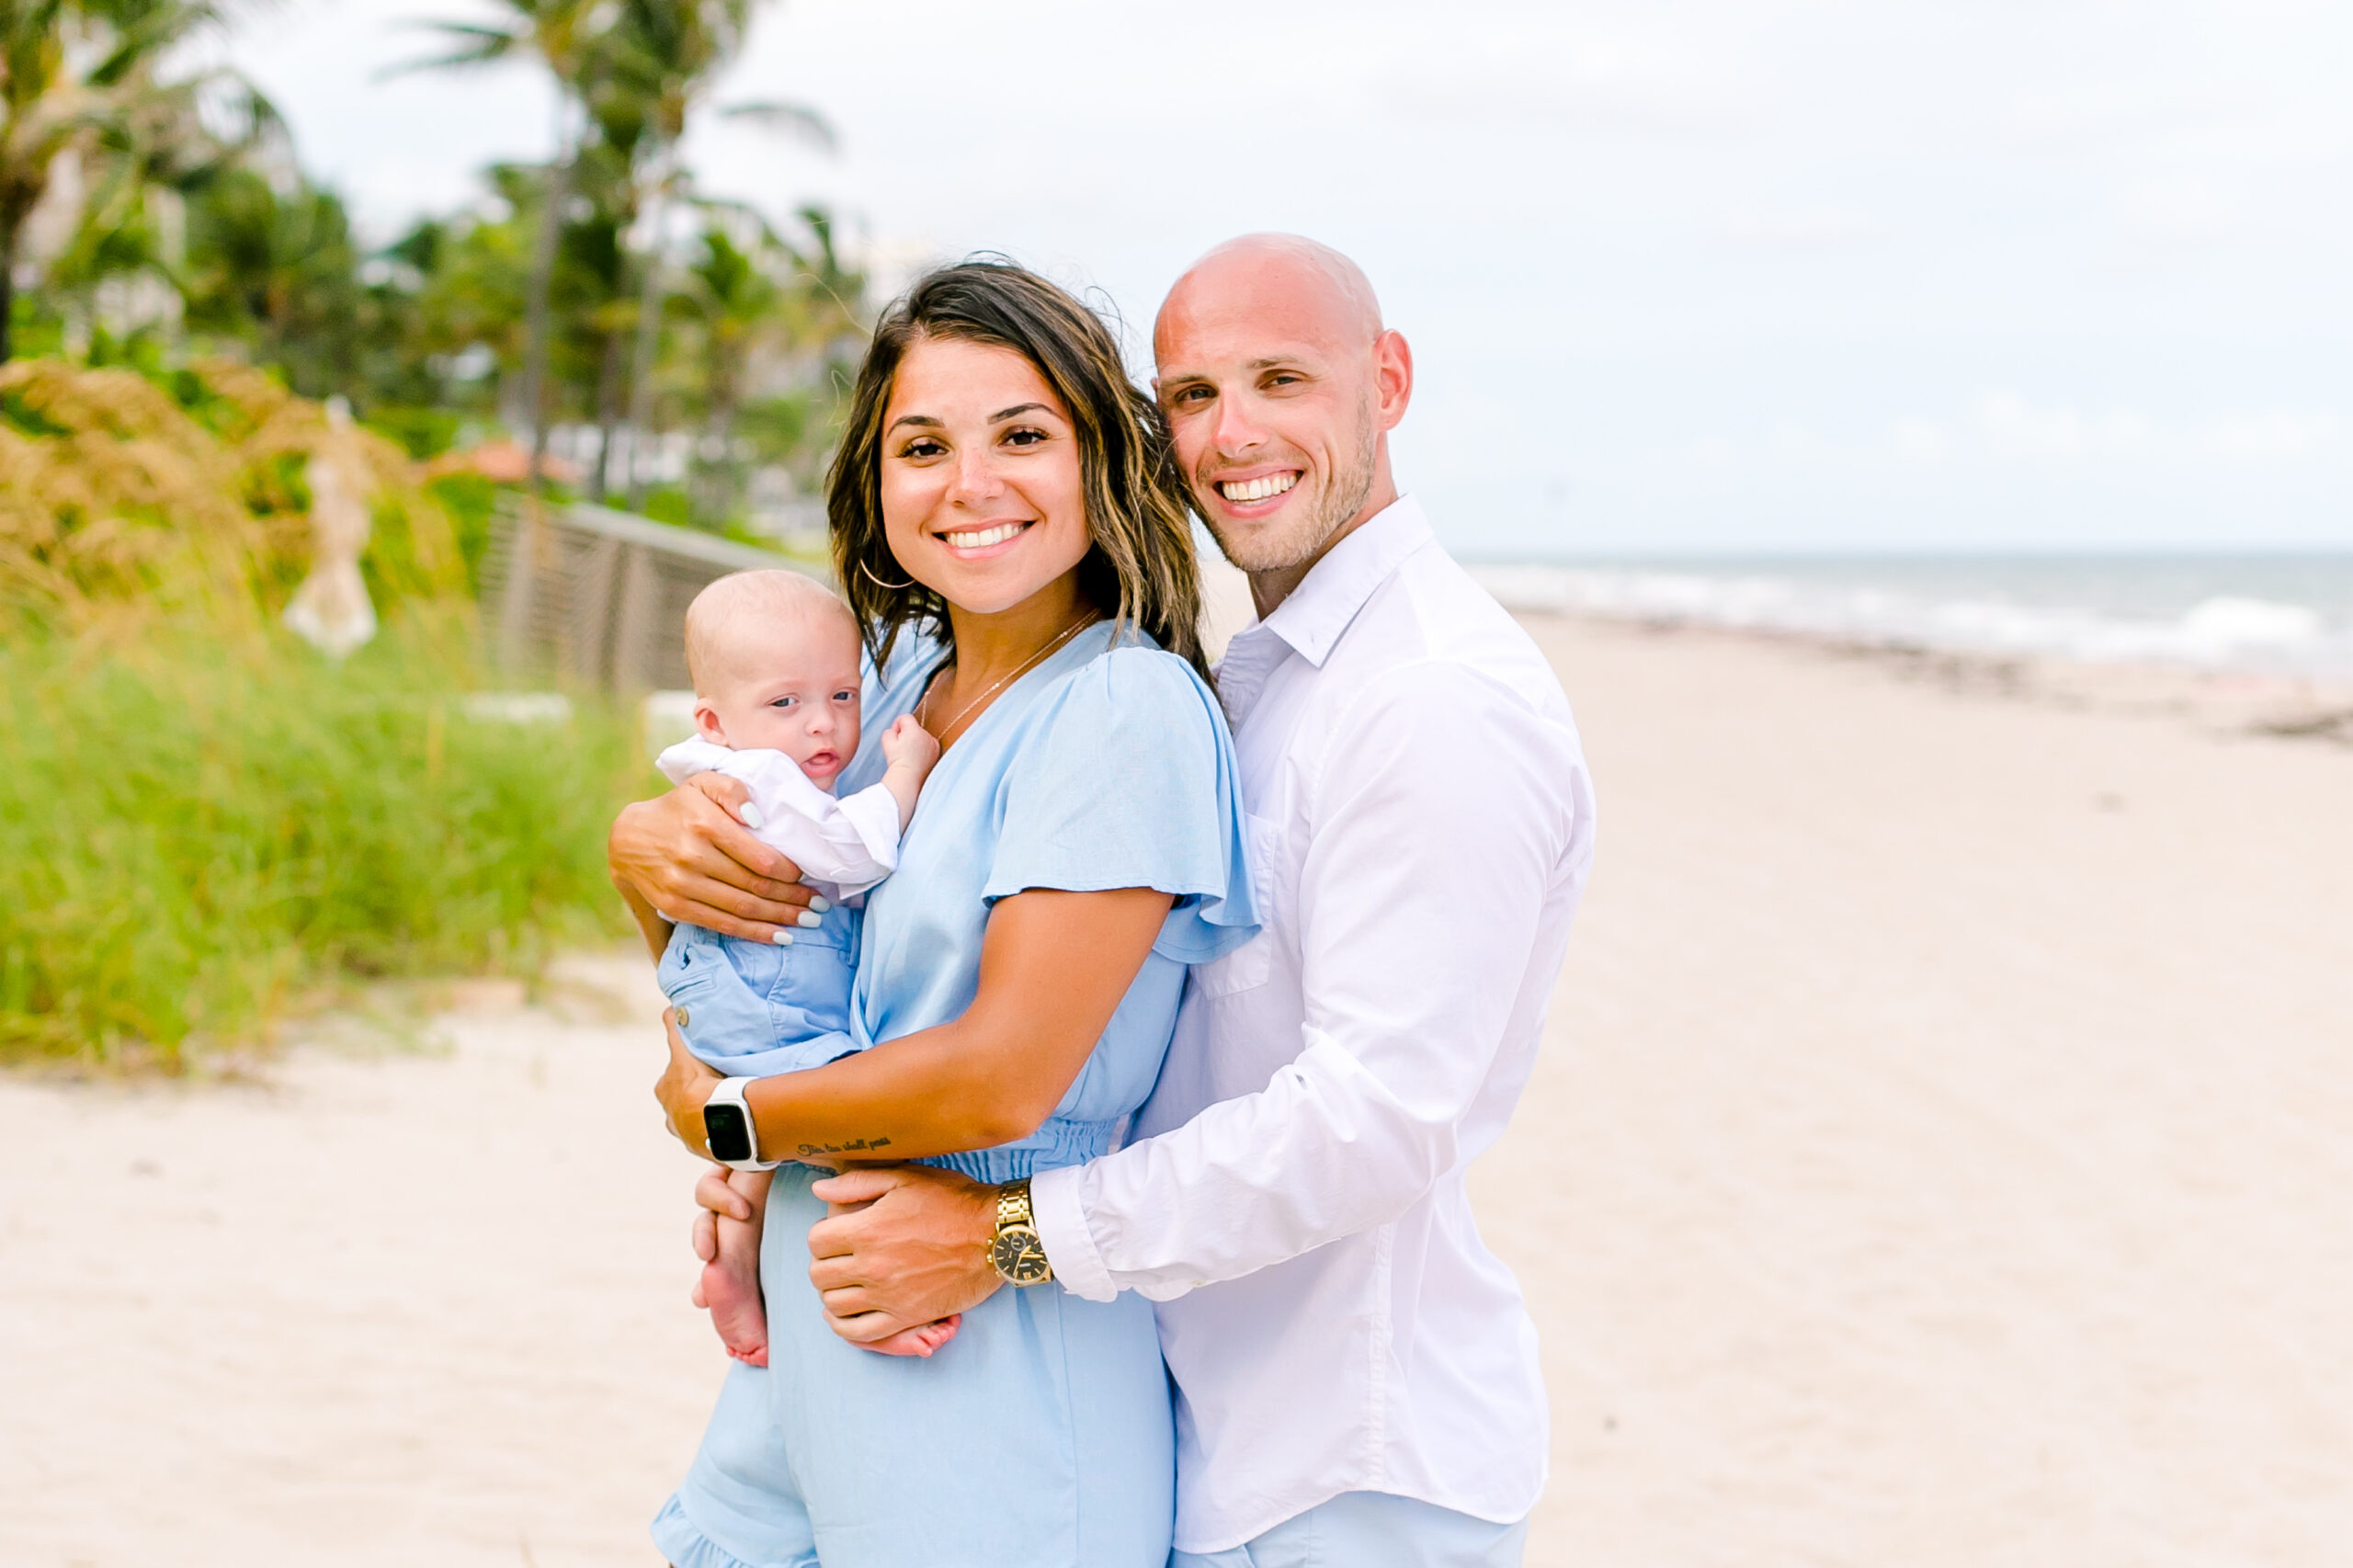 pose for family photography with young baby | fort lauderdale family photographer | engagement photos on fort lauderdale beach